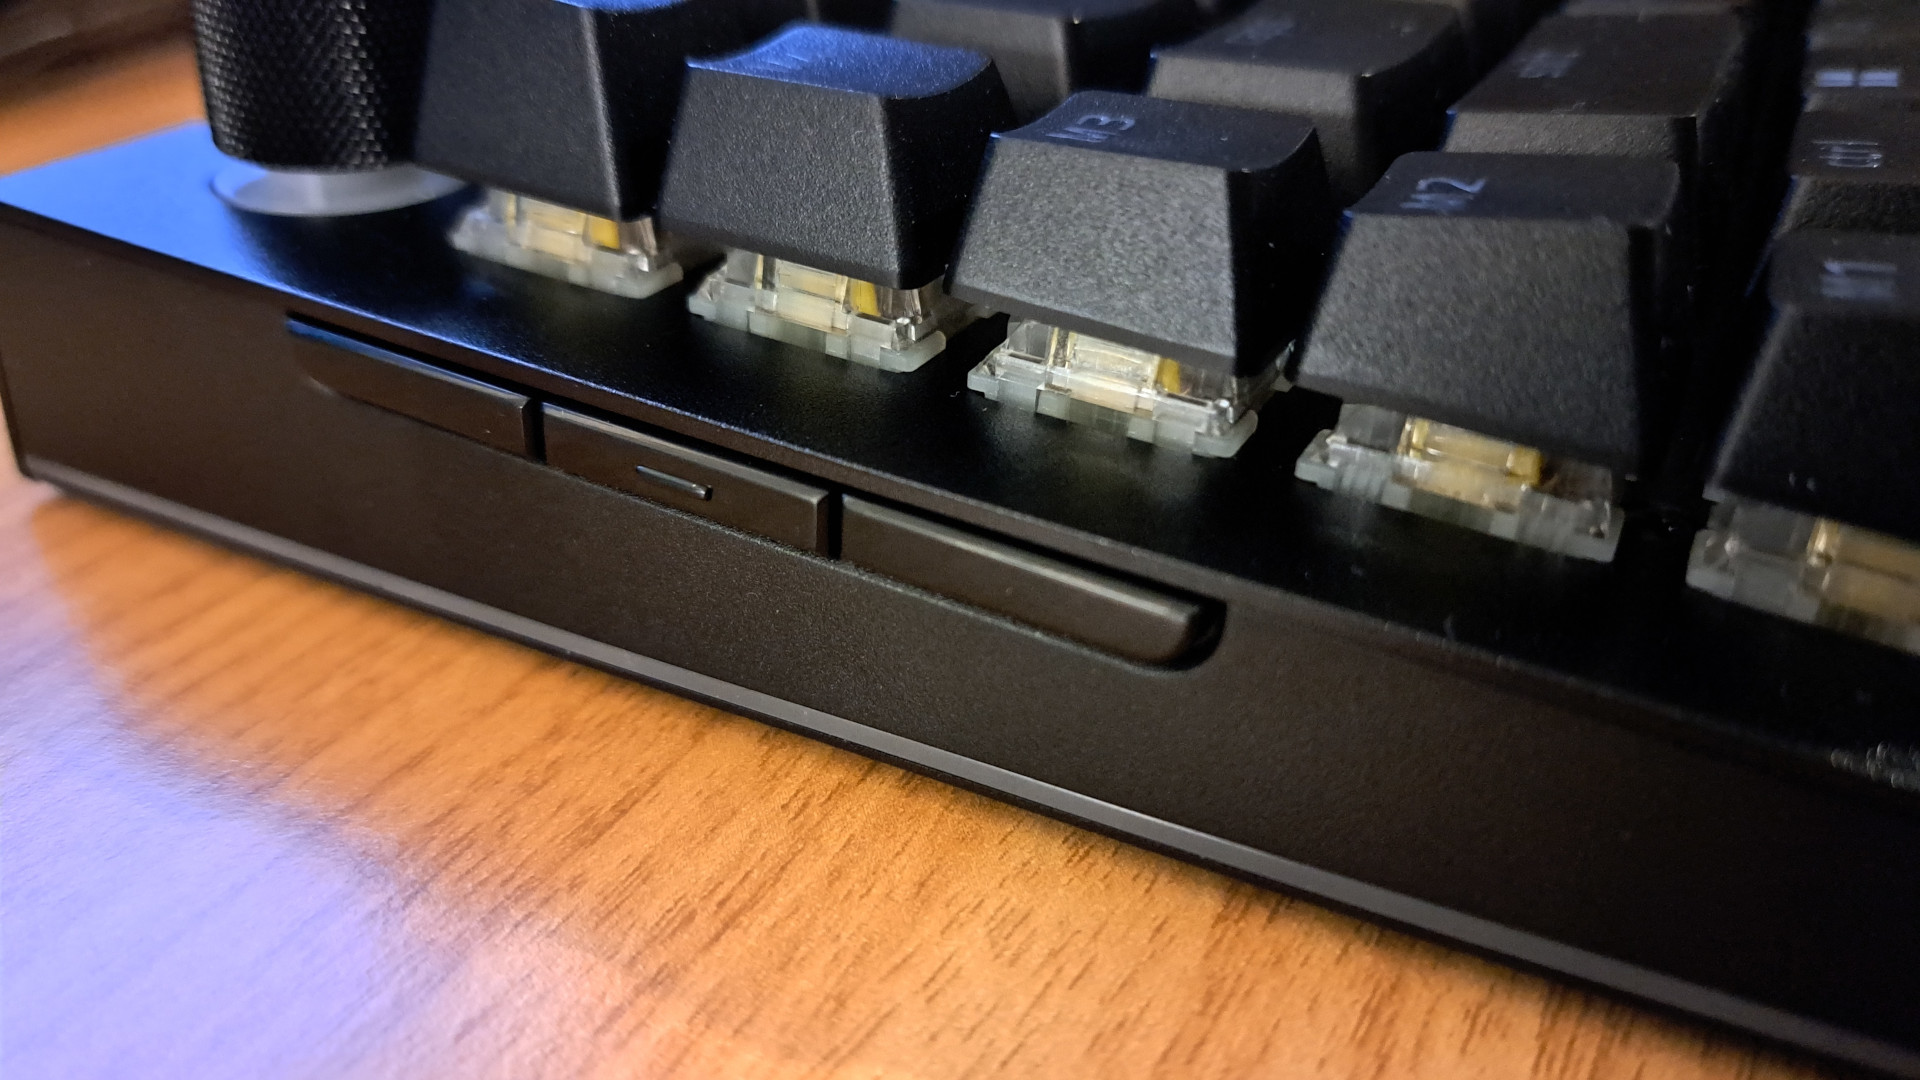 Razer BlackWidow V4 Pro review: More than enough buttons, too much